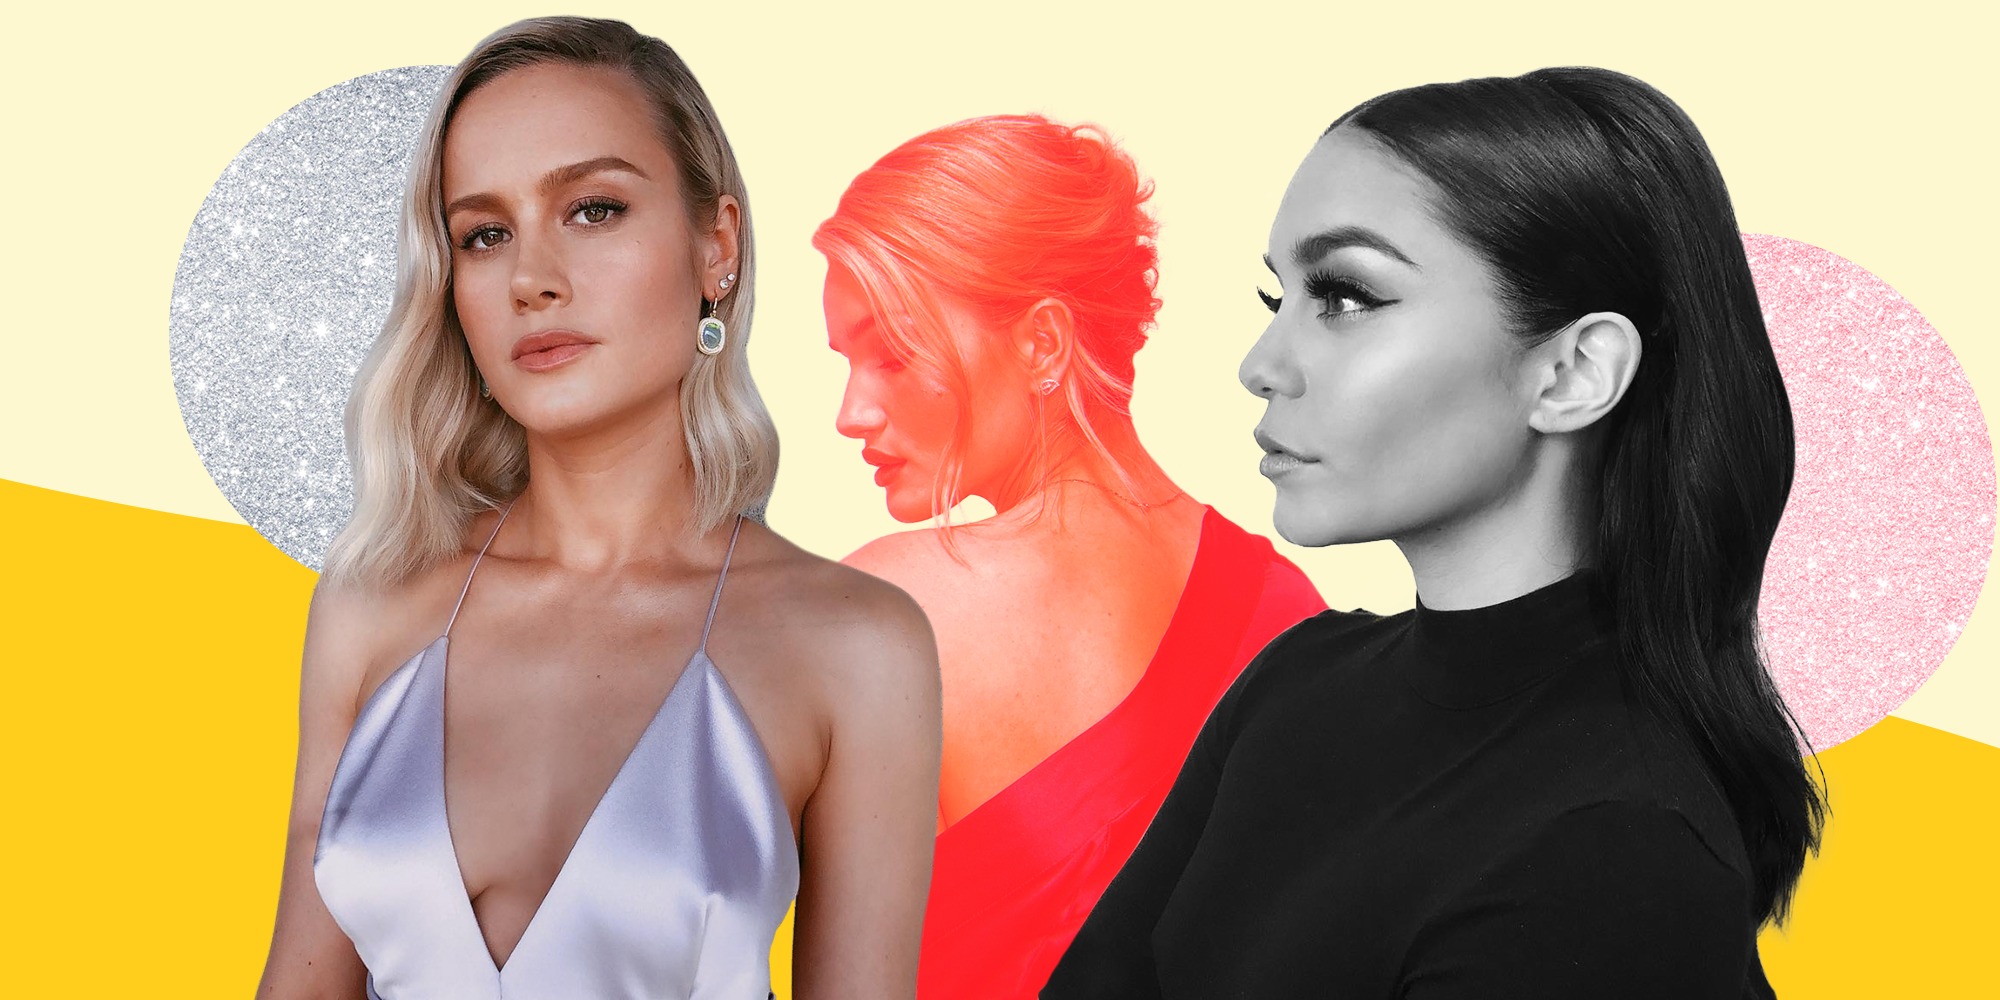 Three wedding guest hairstyles to try: Half up, ponytail, and low bun